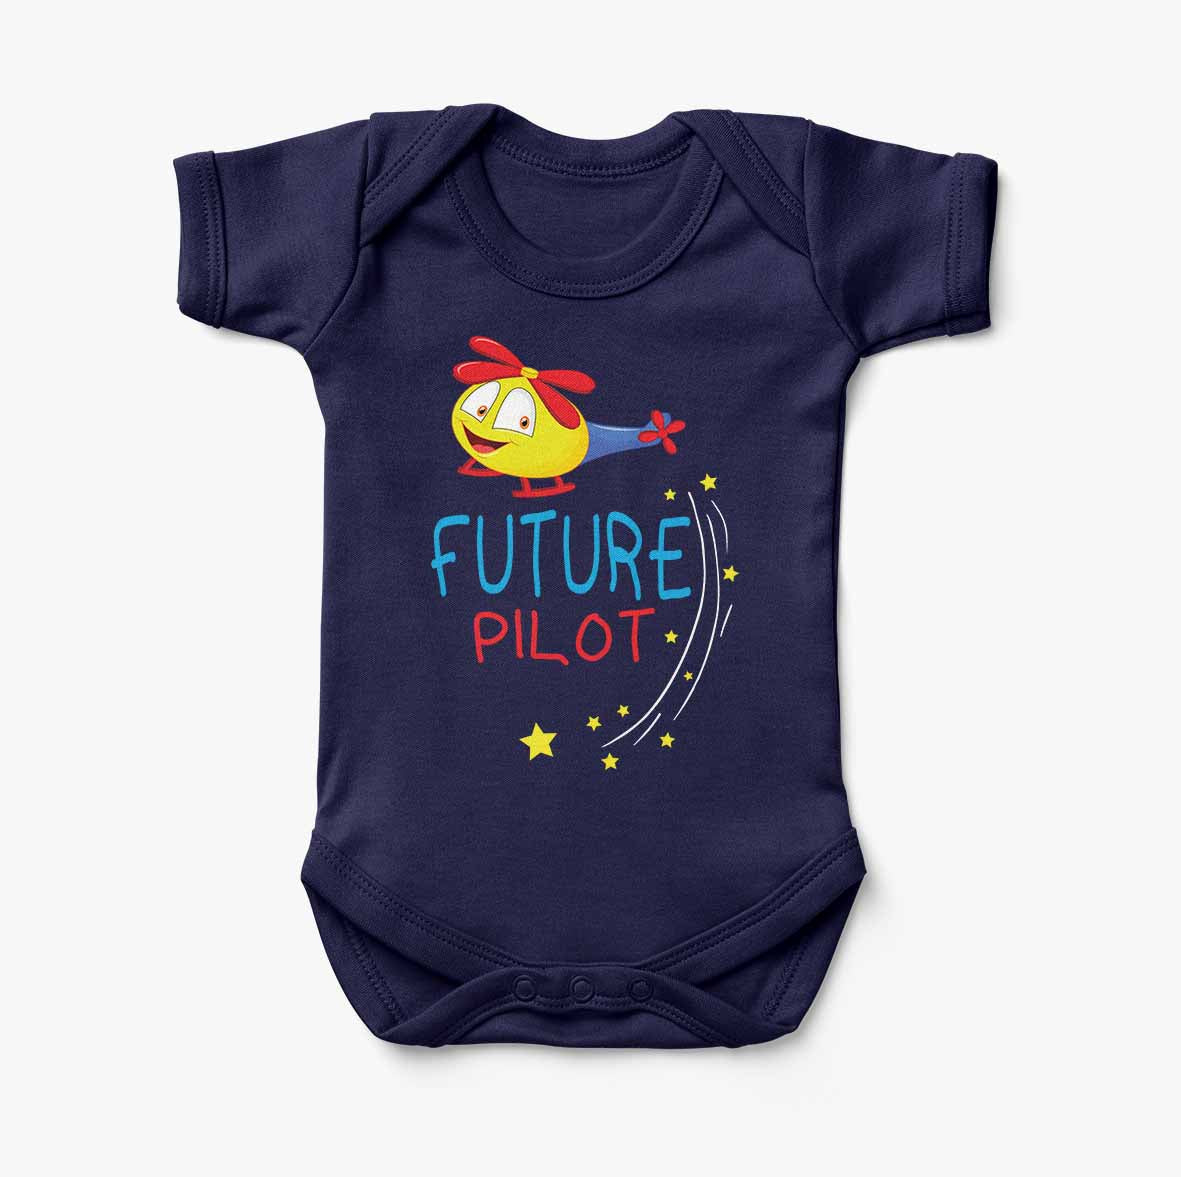 Future Pilot (Helicopter) Designed Baby Bodysuits